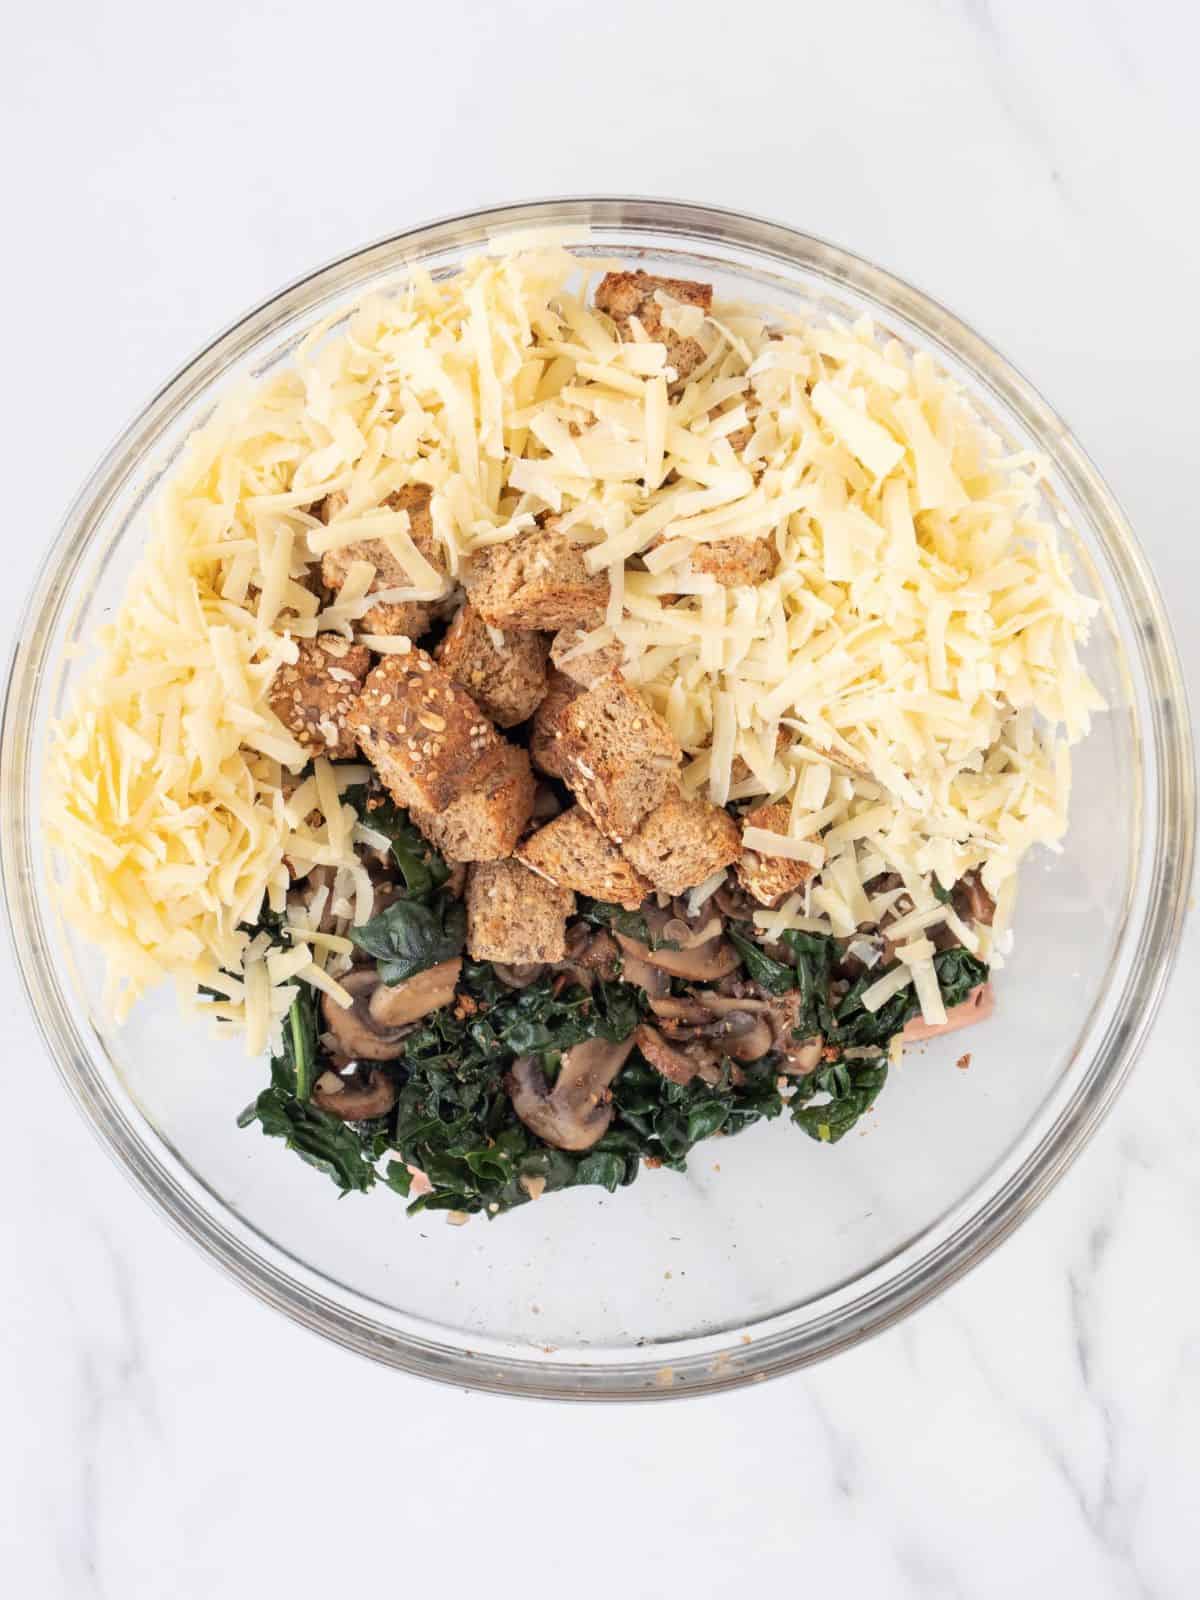 A glass mixing with with the mushroom and kale mixture that was cooked, along with shredded cheese and bread cubes. 